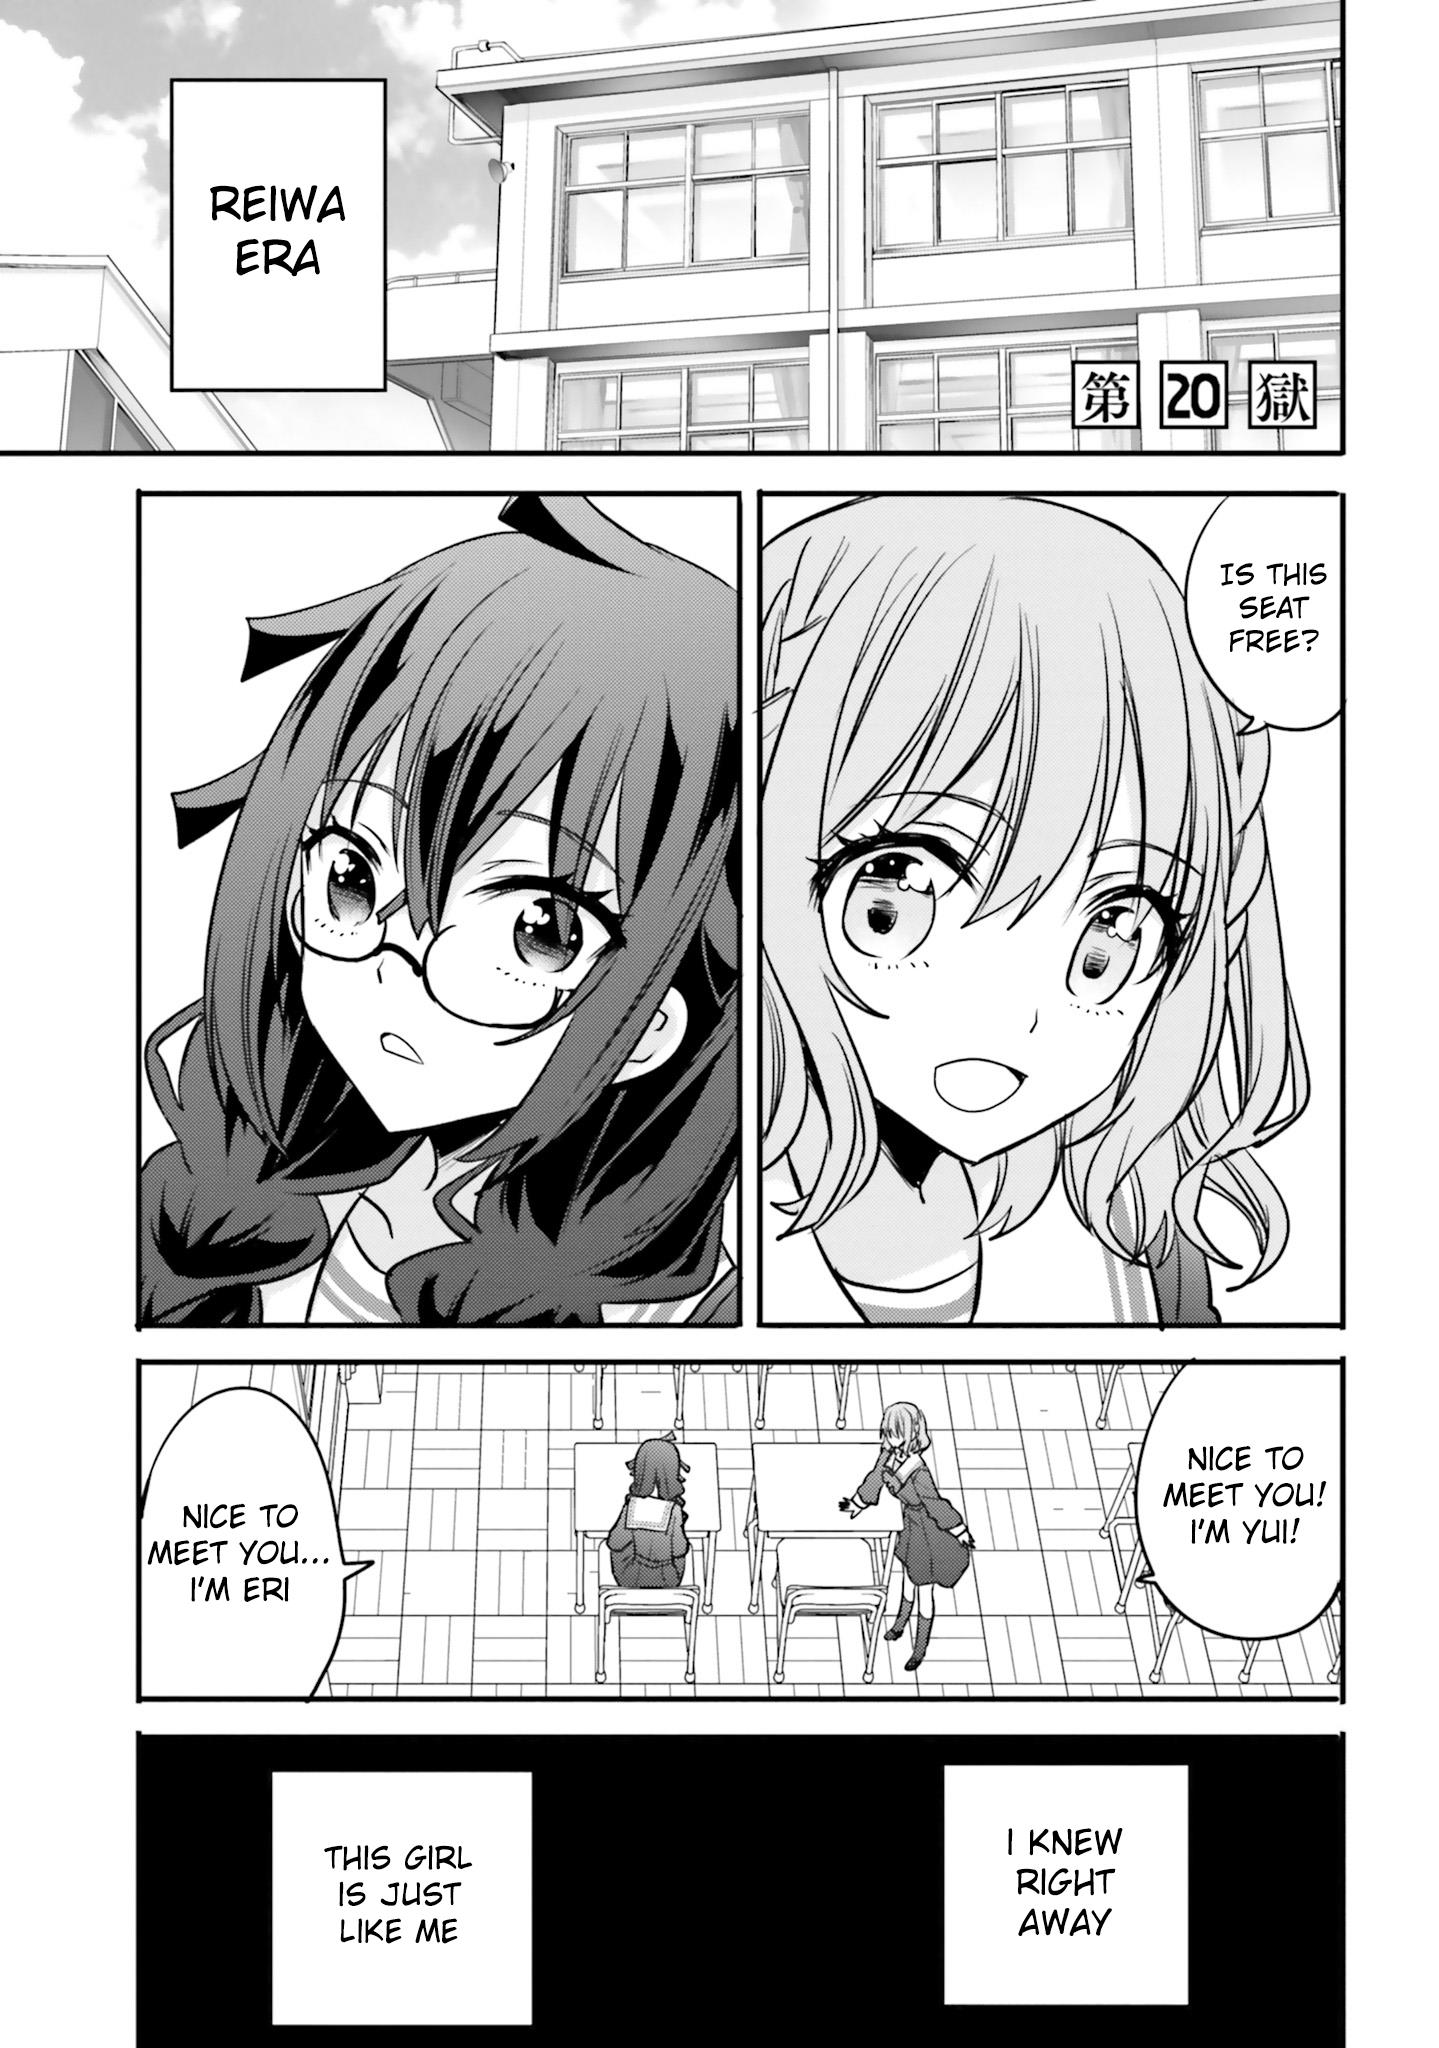 A Girl's Prison In Another World - Page 2